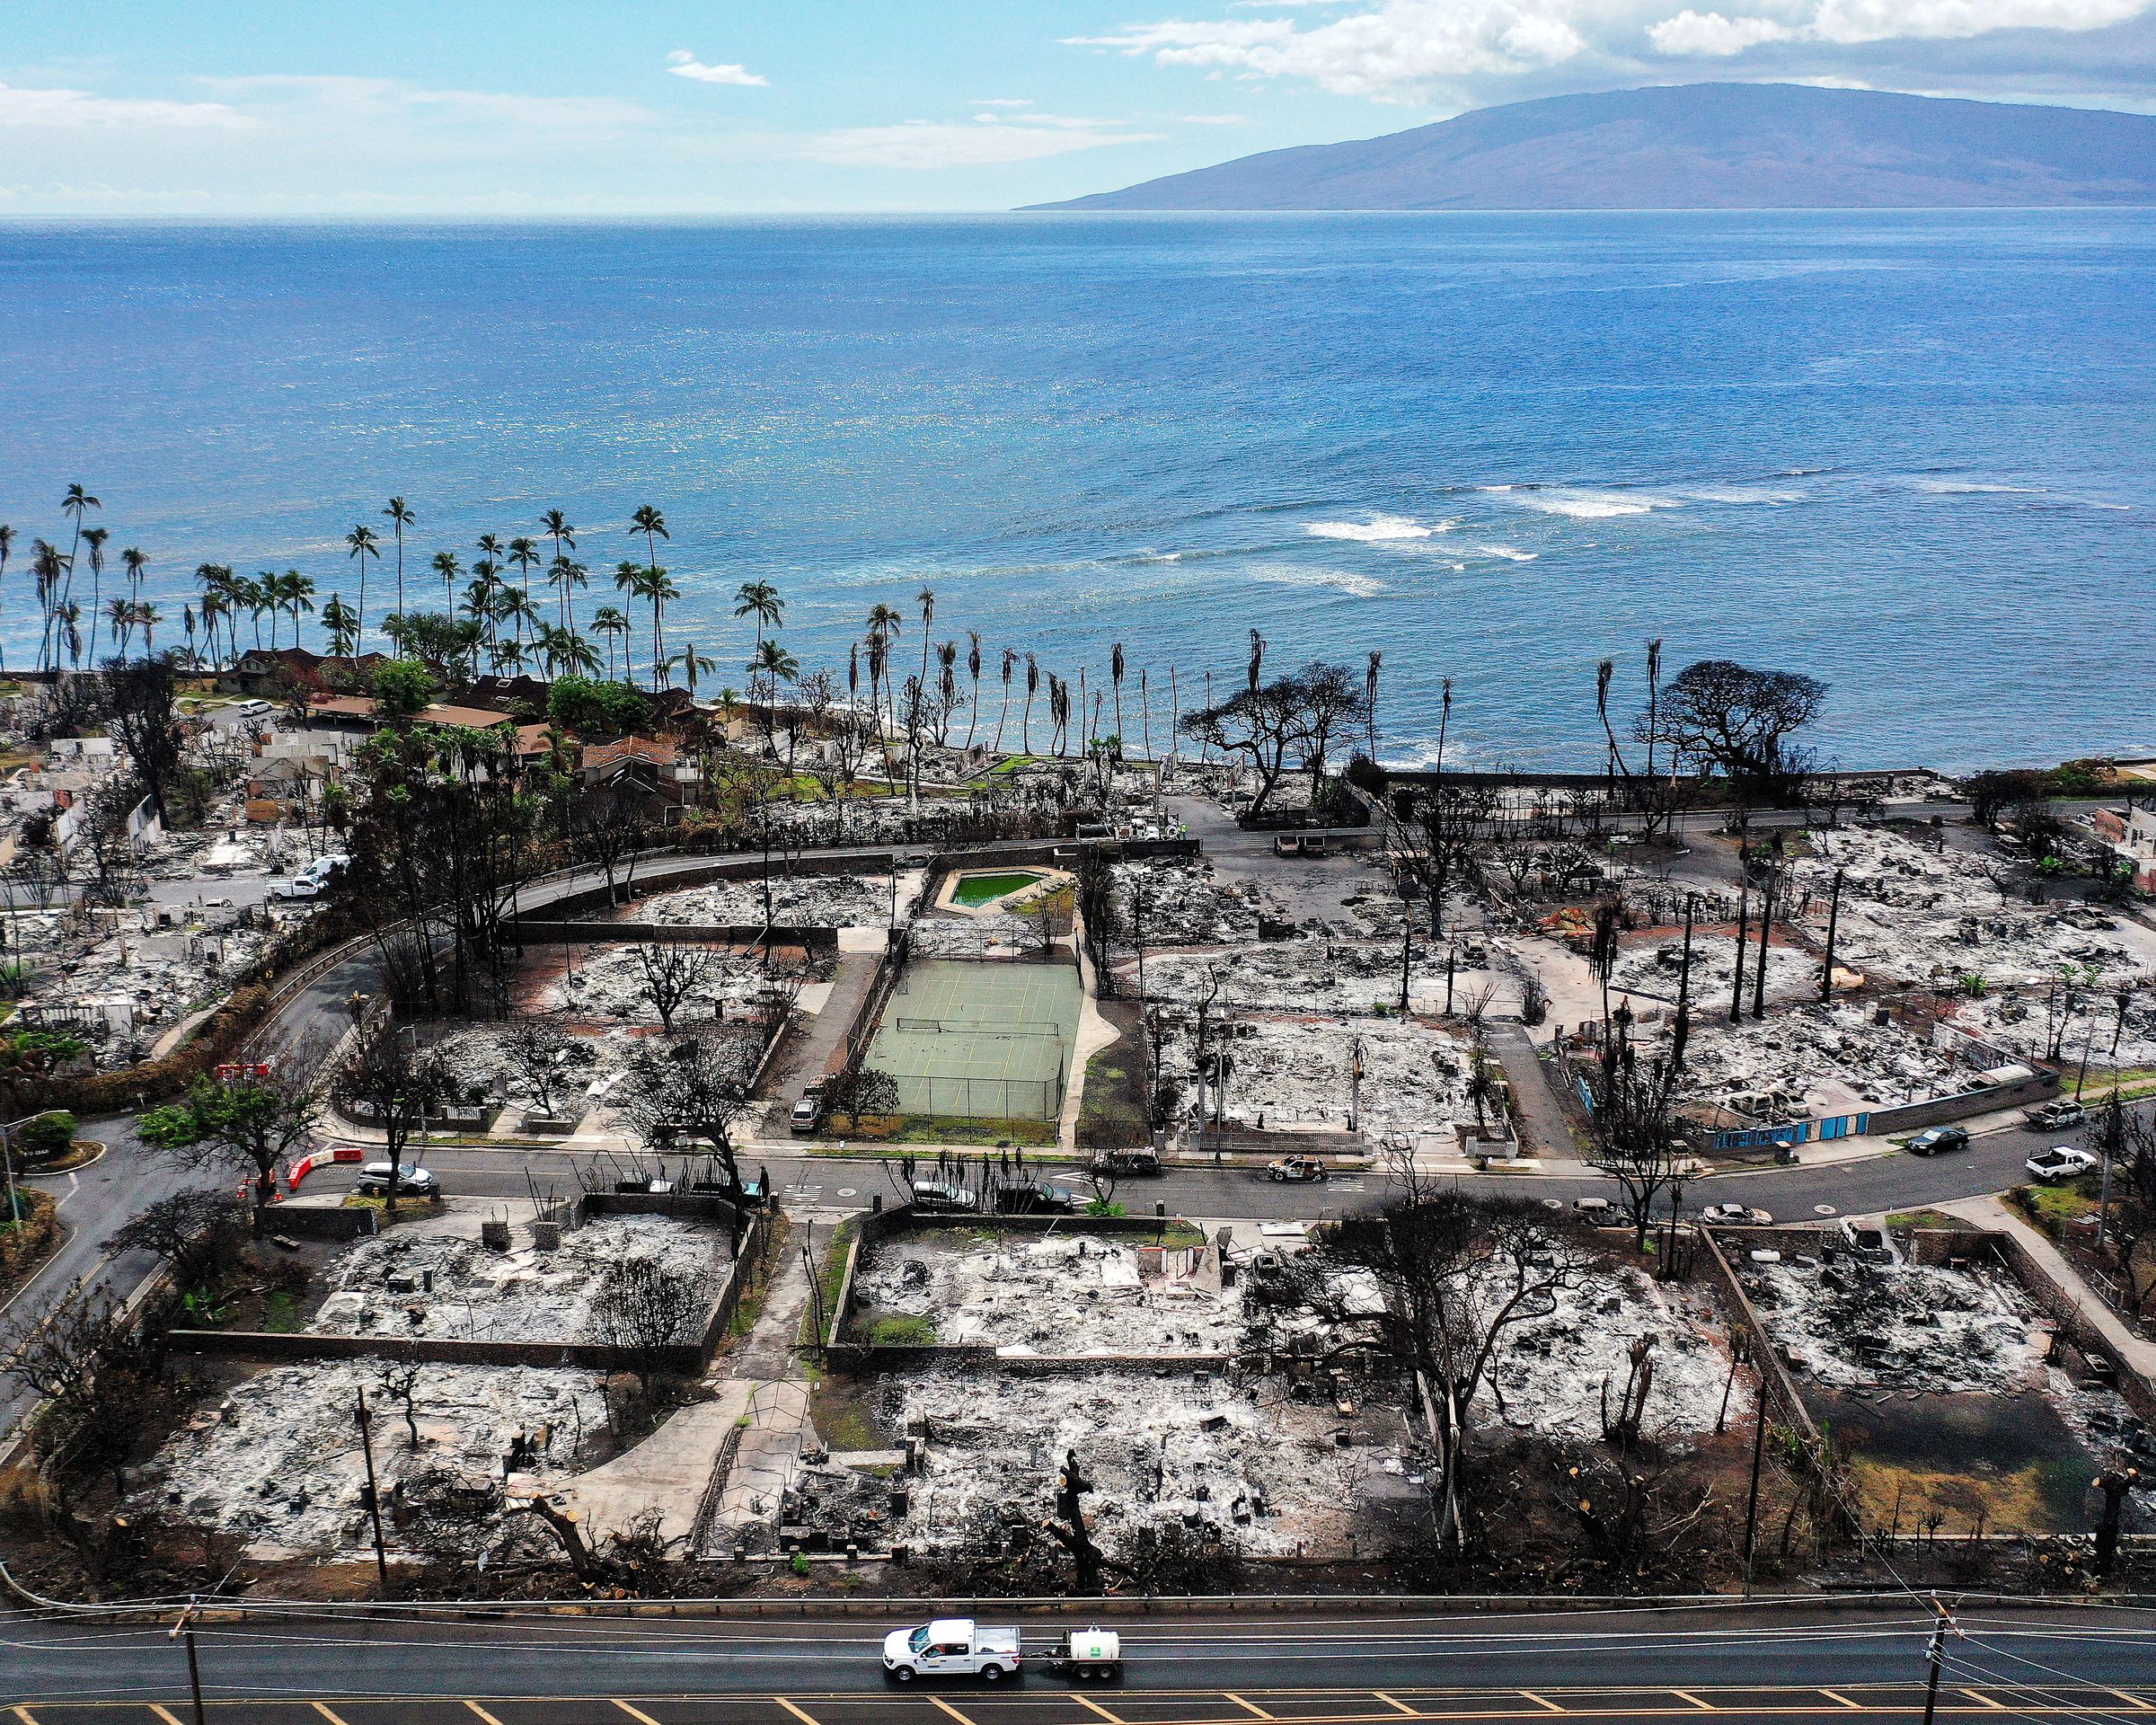 In an aerial view, a recovery vehicle drives past burned structures and cars in a neighborhood next to shoreline.